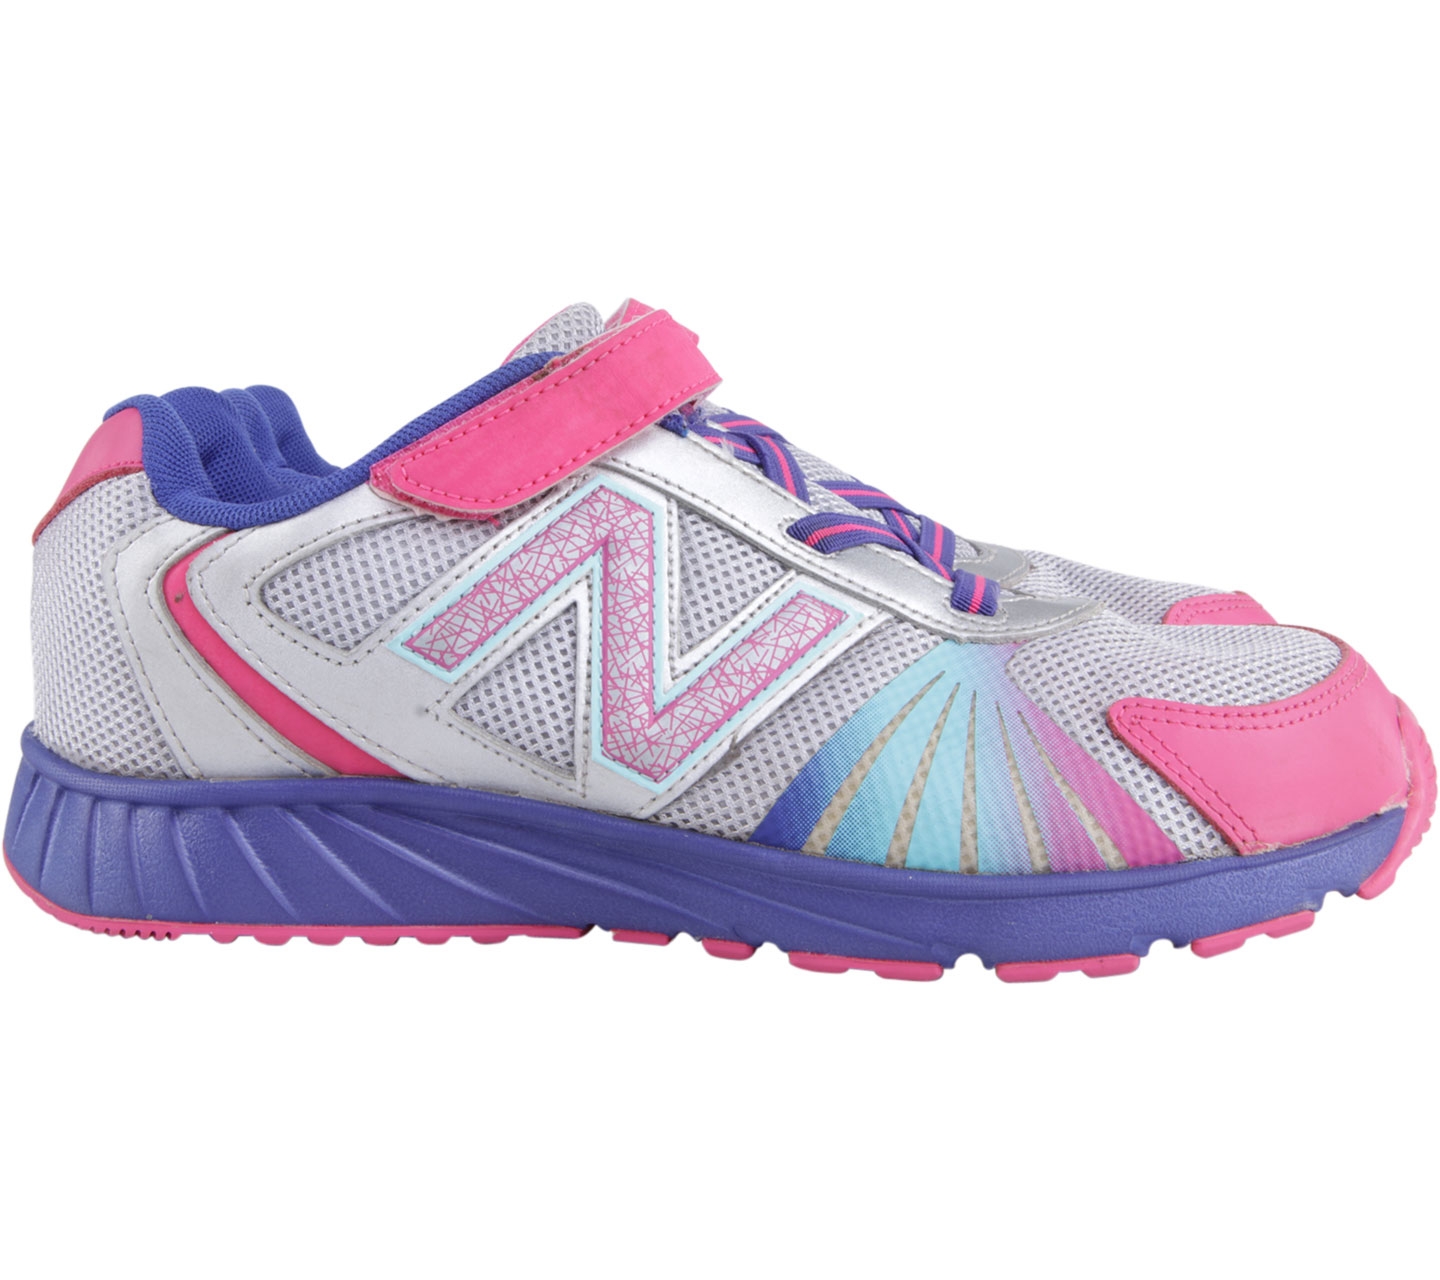 New balance multicolor sneakers